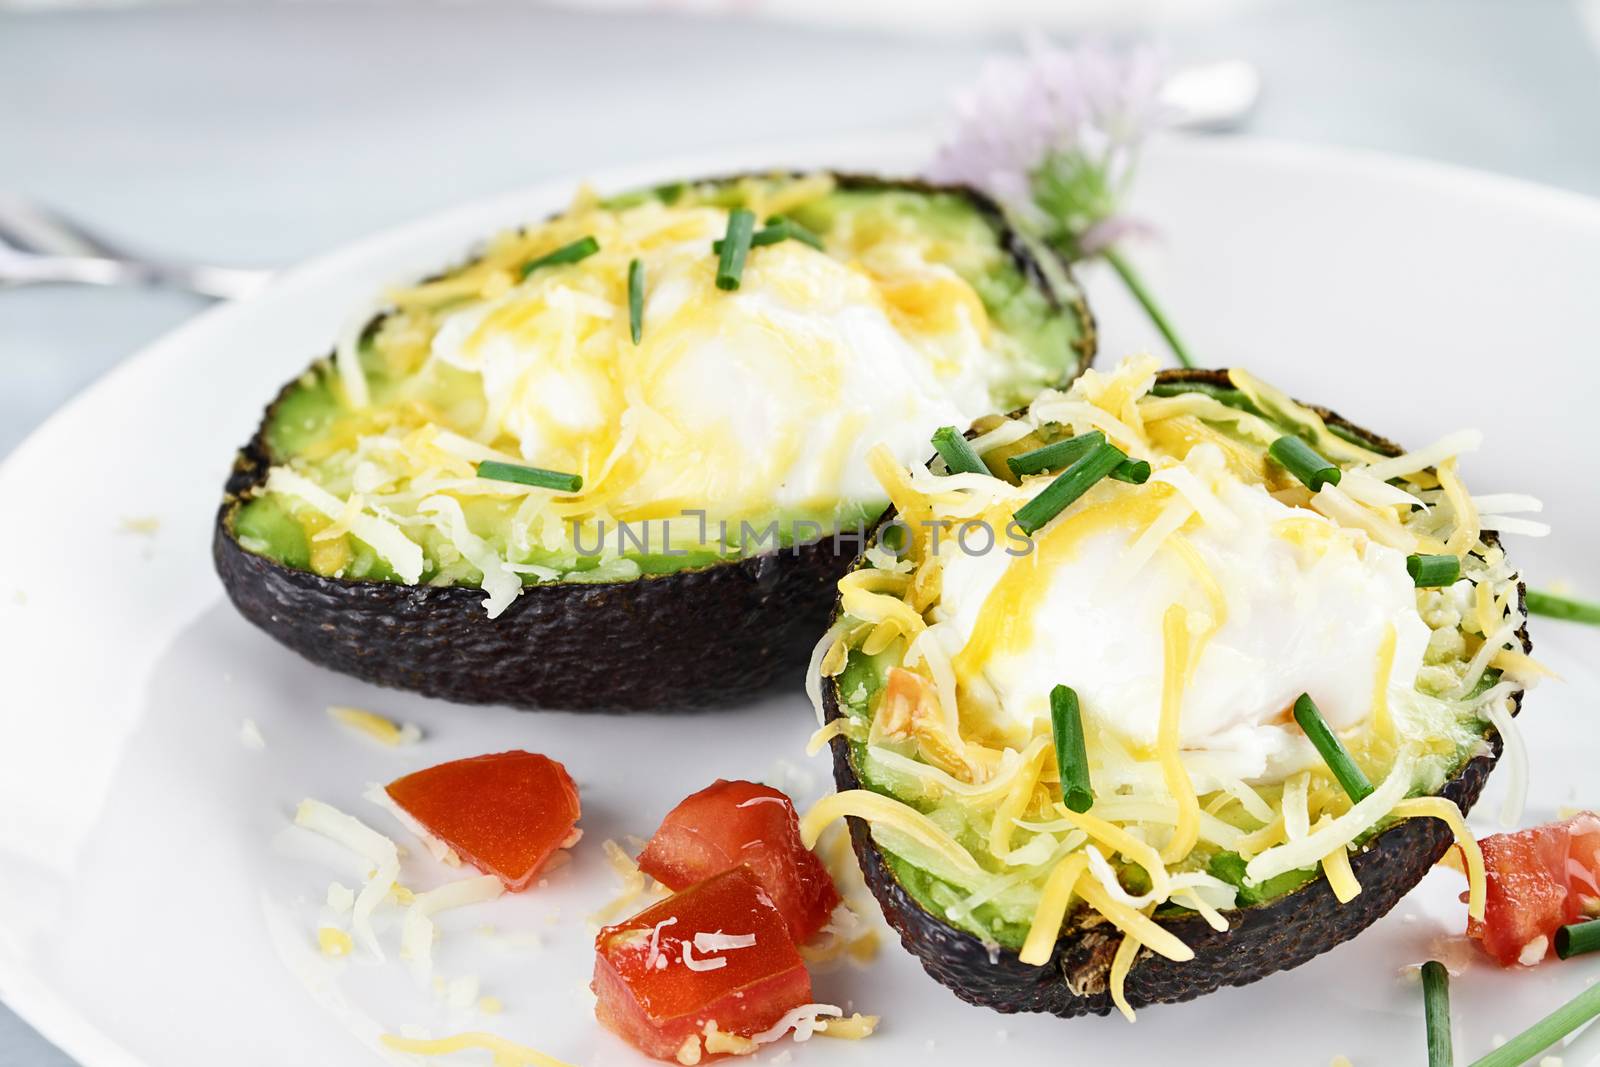 Eggs with cheddar cheese baked in fresh avocados and garnished with chives. Extreme shallow depth of field.